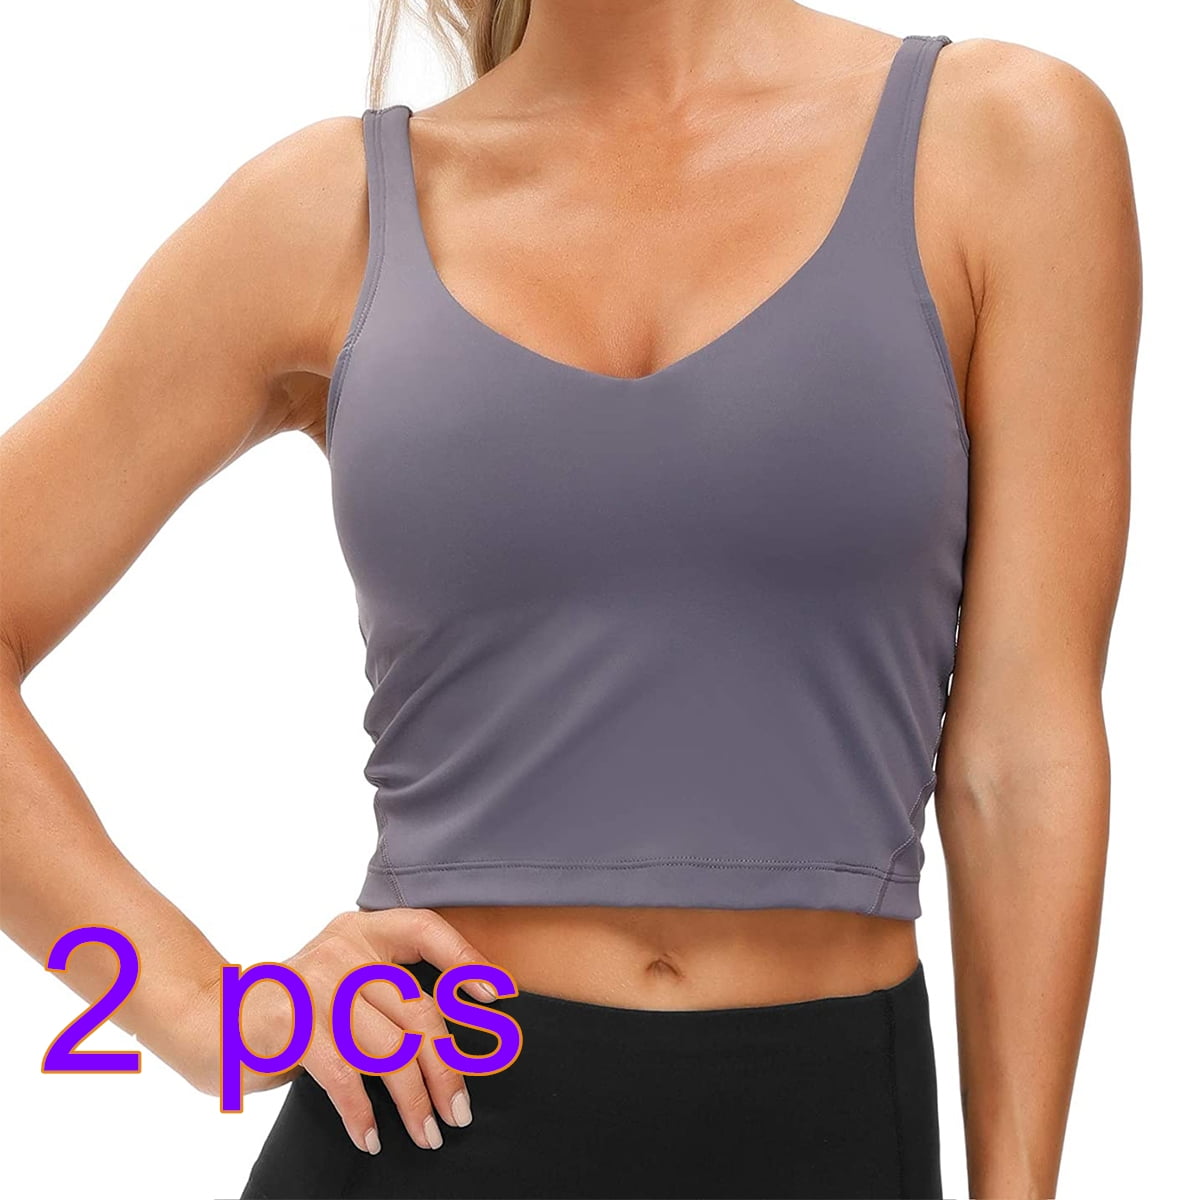 APEXFWDT Women's Longline Halter Neck Sports Bra Wirefree Padded Rib  Support Yoga Bras Gym Running Workout Tank Tops 